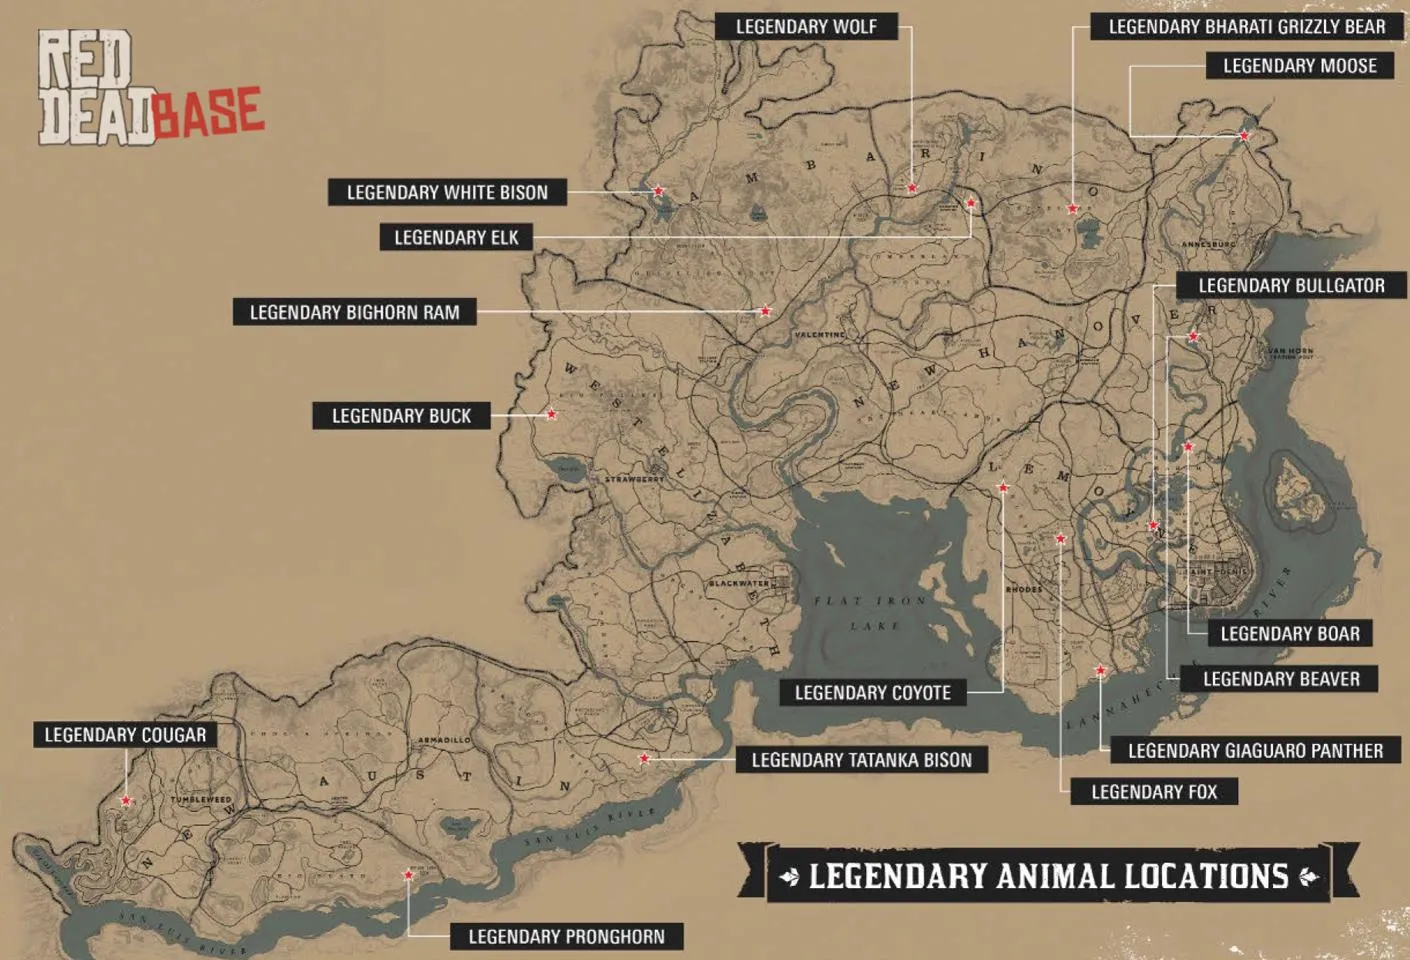 Legendary White Bison - Map Location in RDR2